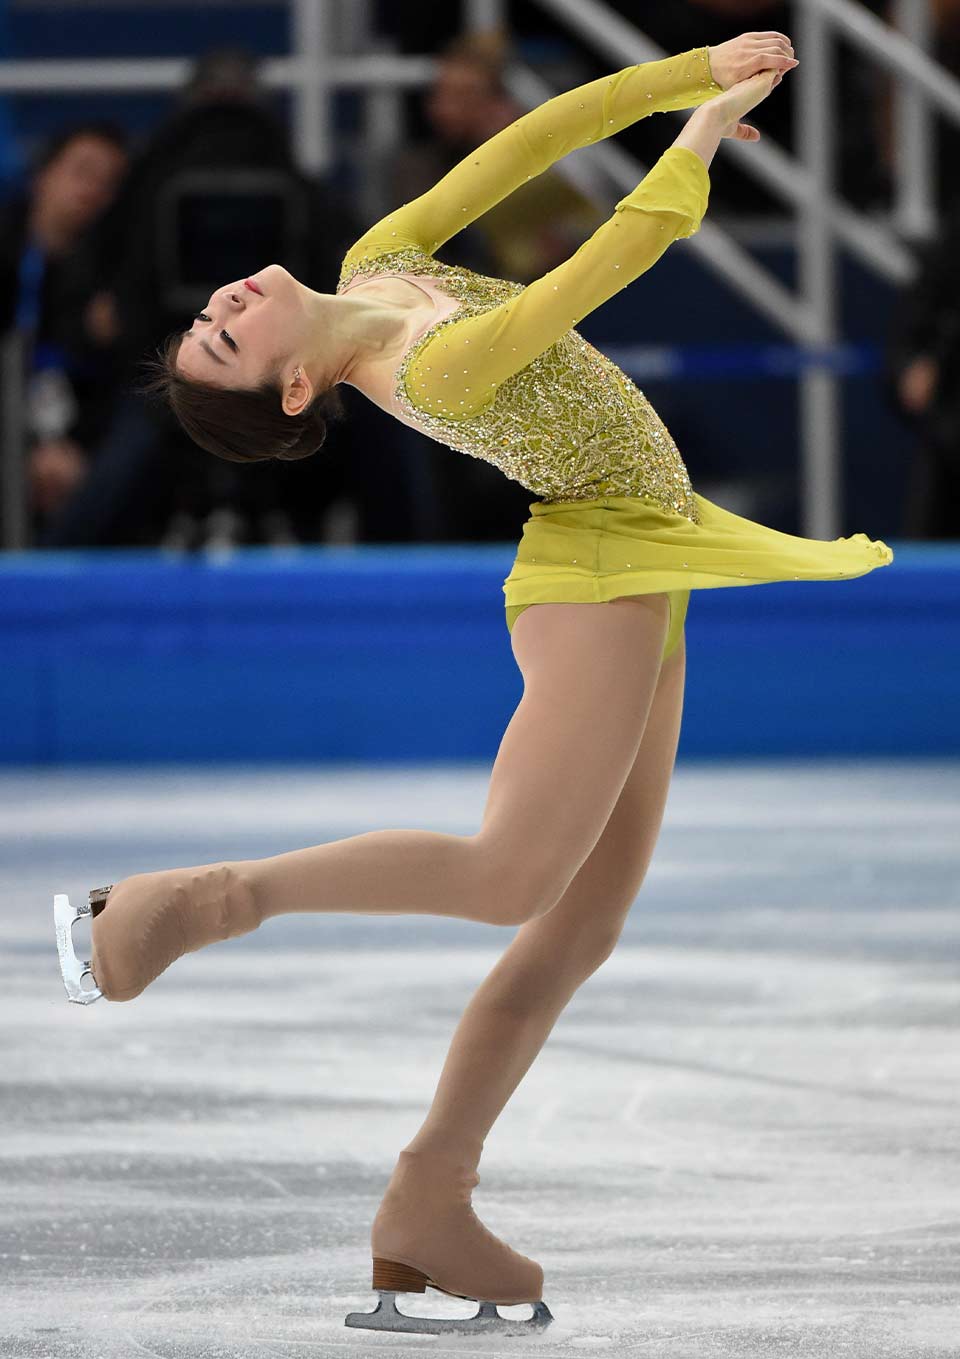 A photograph of an ice skater in performance garb at a competition